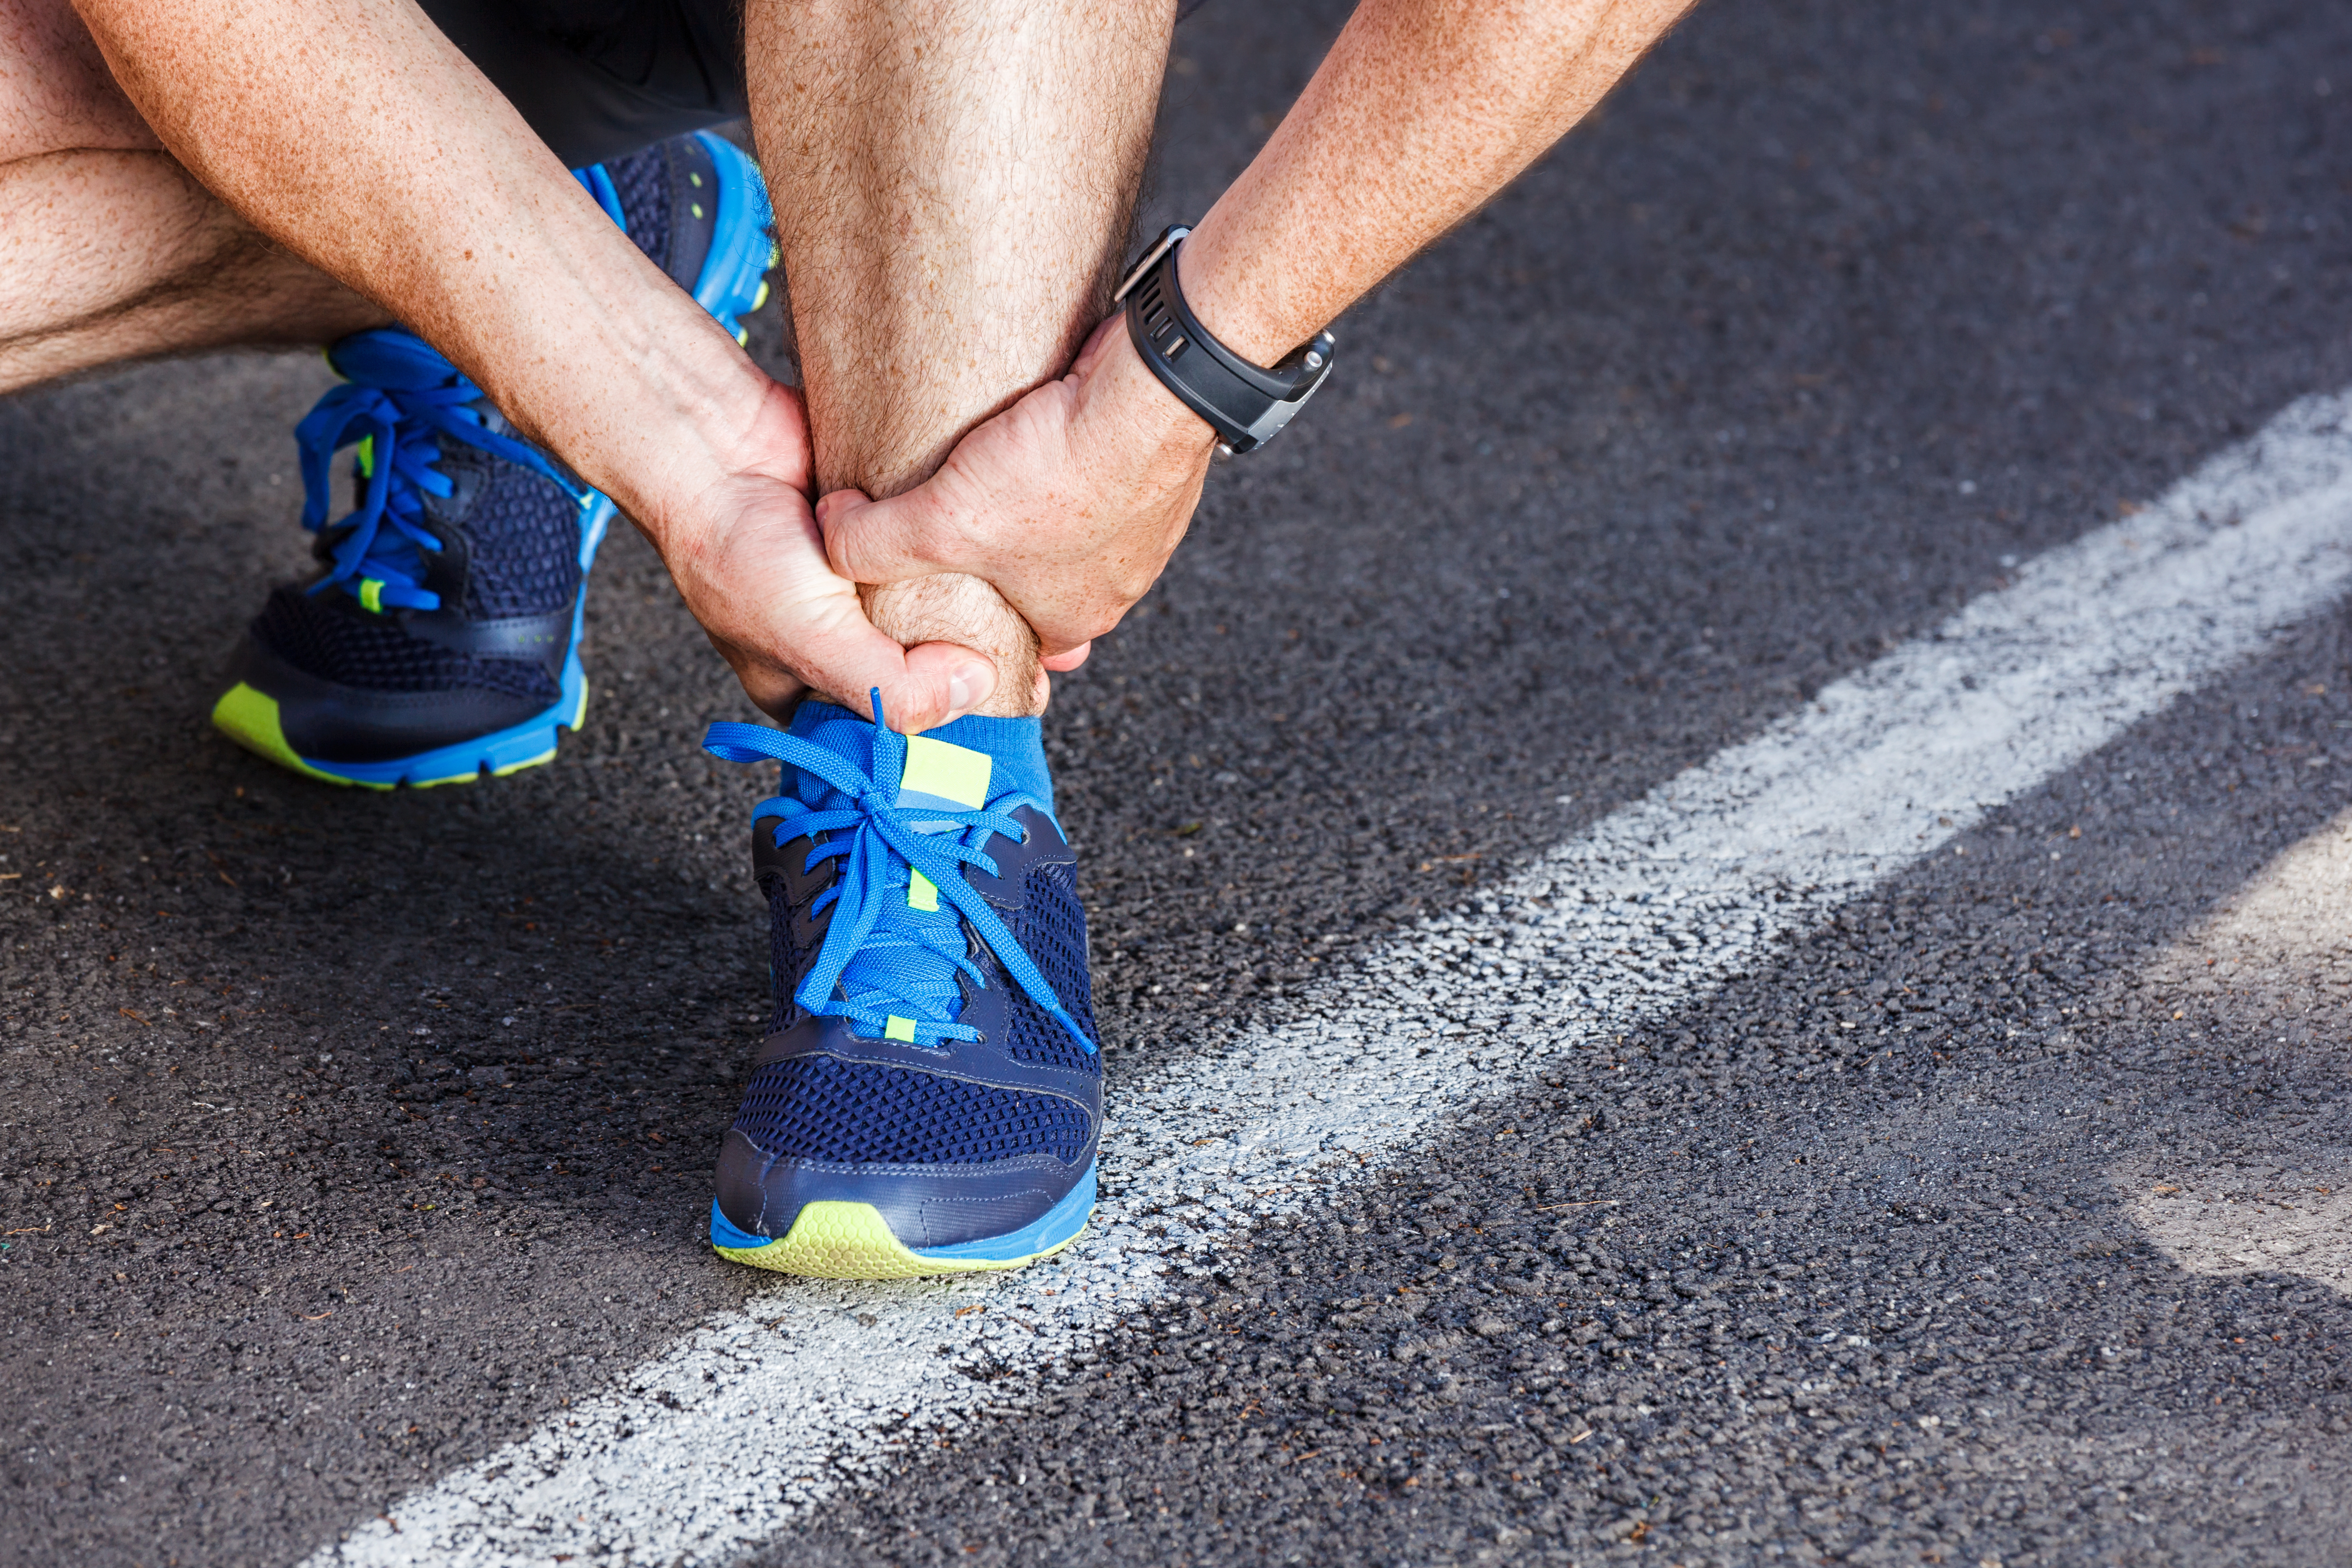 Running has great health benefits; however, it is a high-impact activity that can put you at risk for foot or ankle injuries. Follow tips from foot and ankle orthopaedic surgeons to run safely and pain free.